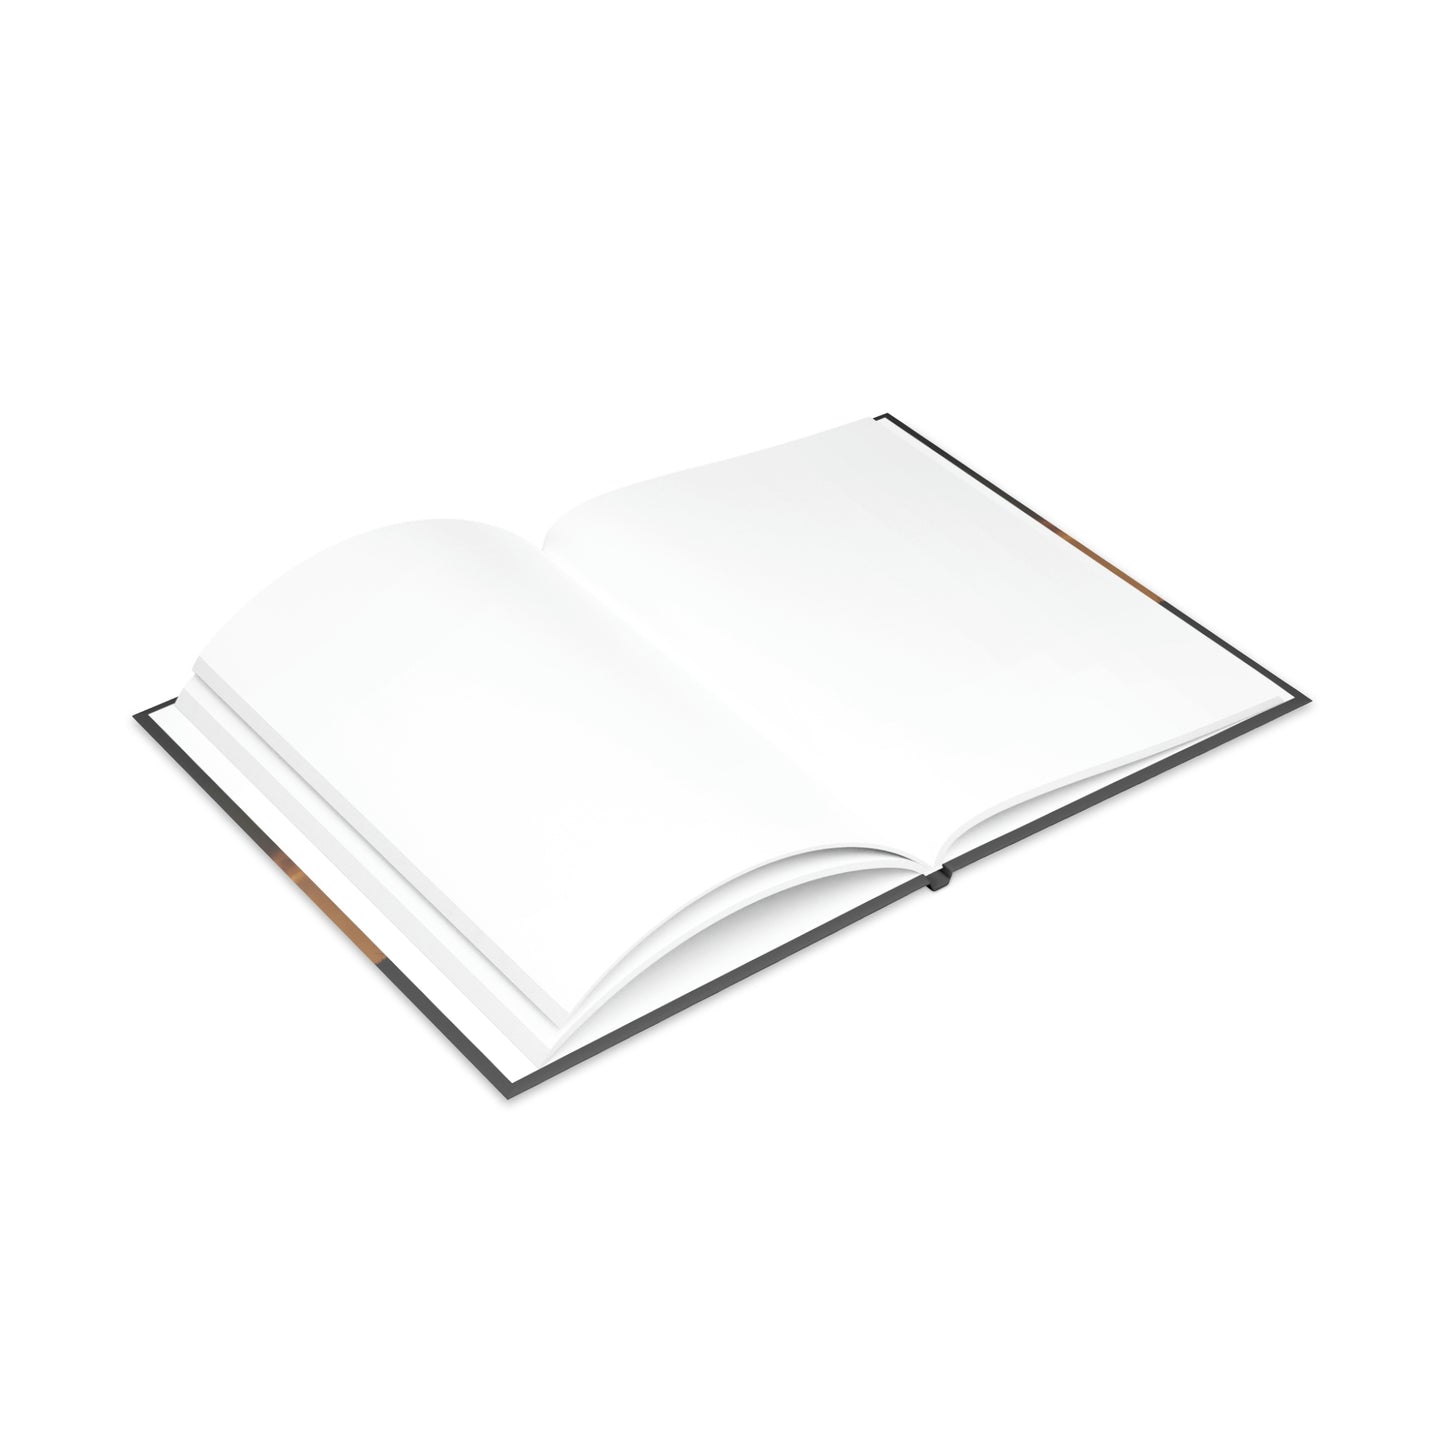 Tsalack Express Dads Hardcover Notebook with Puffy Covers